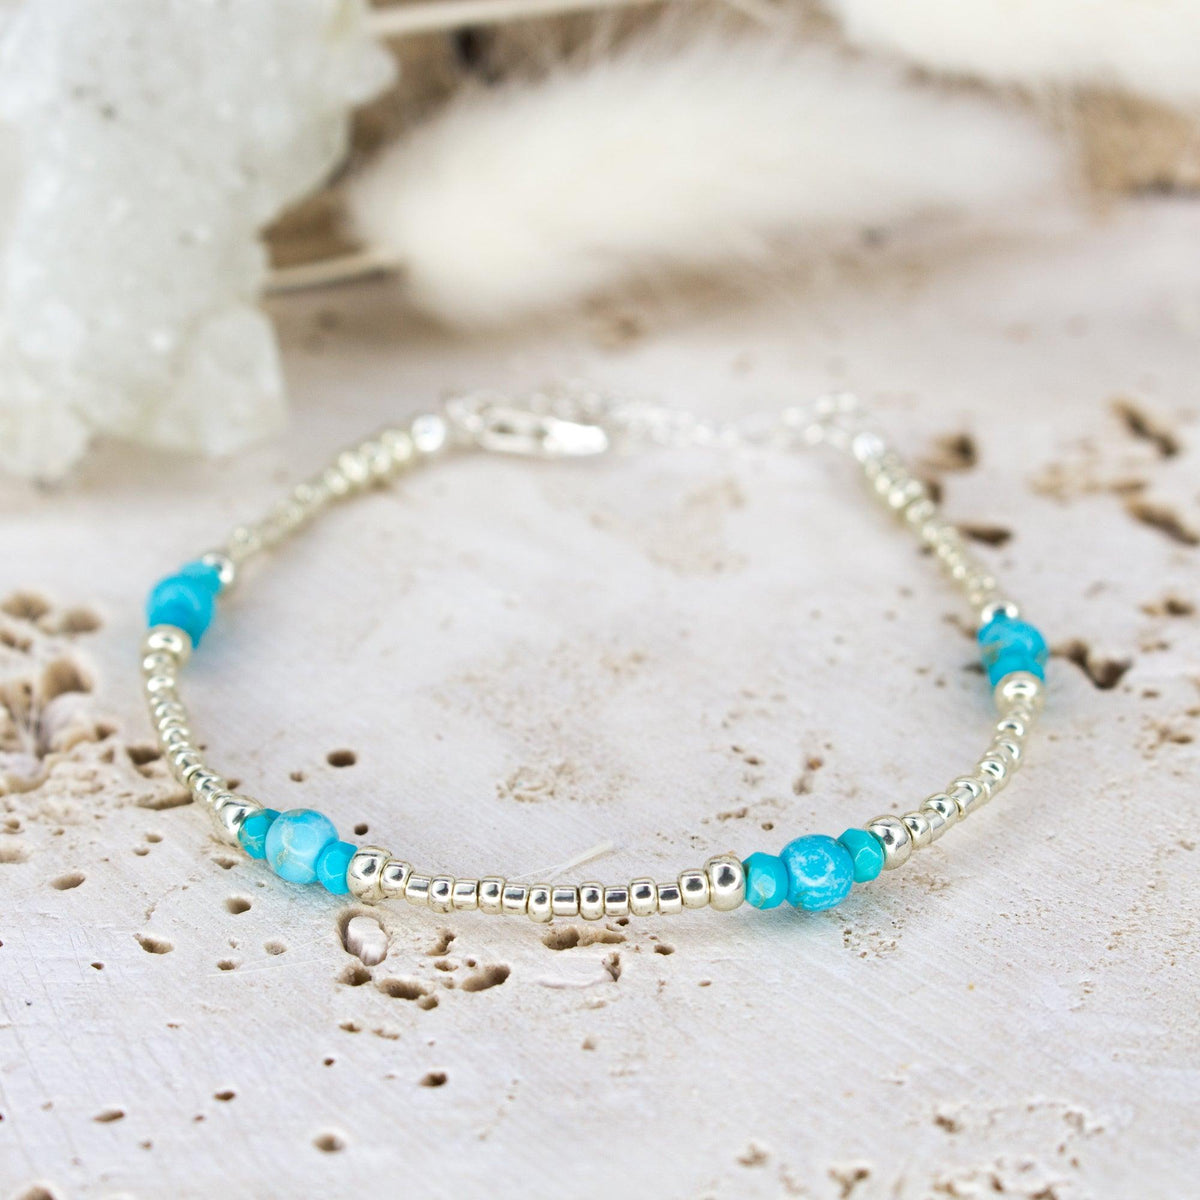 Turquoise Ancient Tides Bracelet - Turquoise Ancient Tides Bracelet - Sterling Silver - Luna Tide Handmade Crystal Jewellery